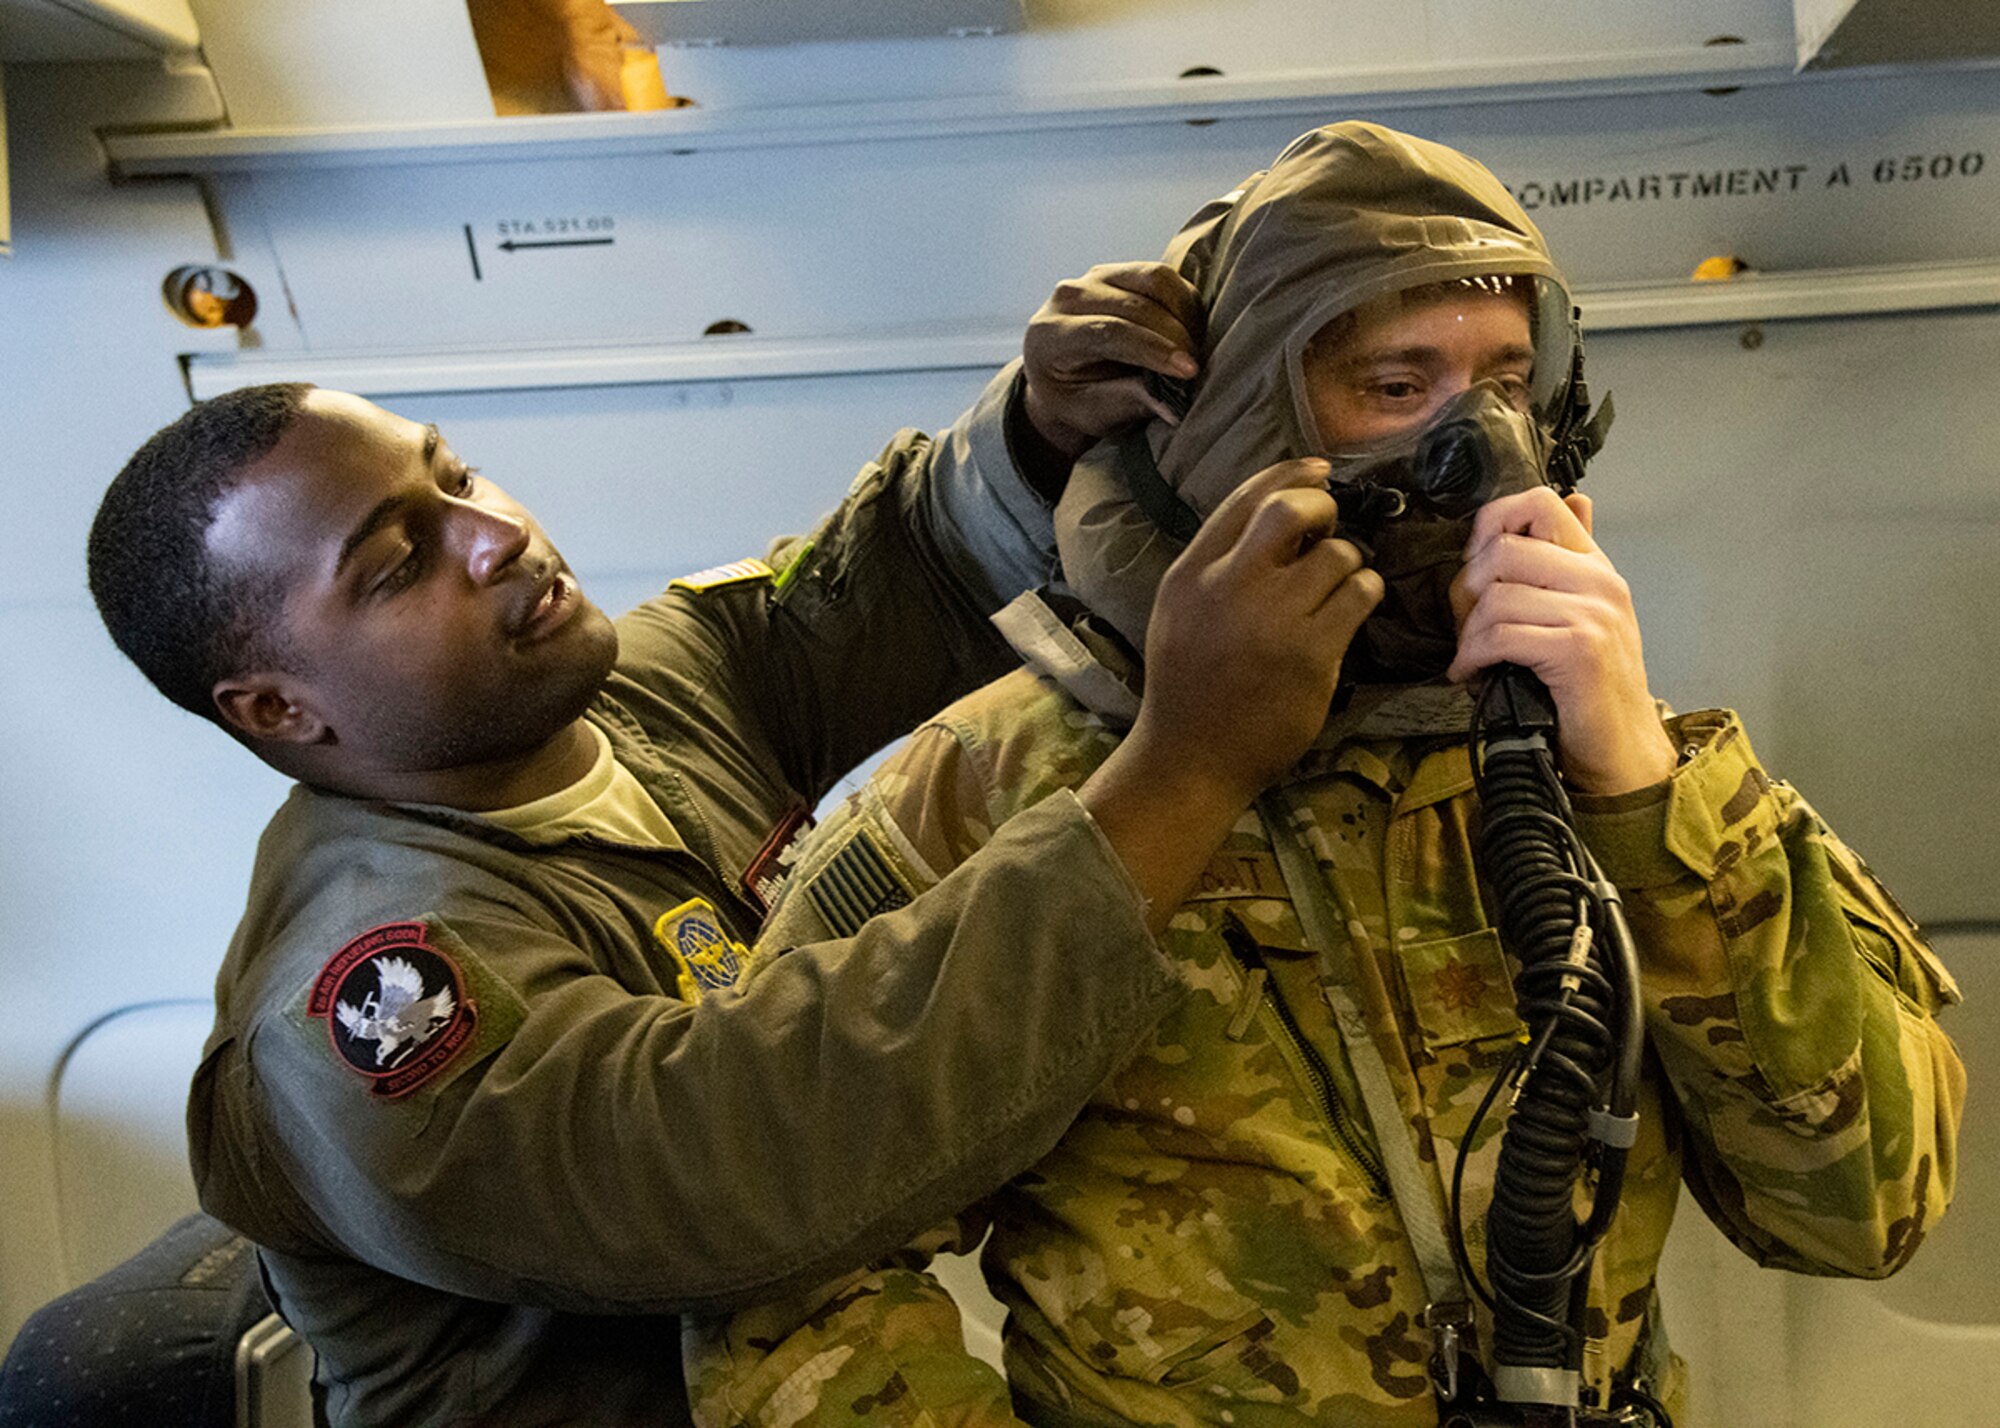 Senior Airman Dorian Cozart, boom operator with the 2nd Air Refueling Squadron, assists Major Brett Kubat, KC-10 Extender pilot with the 2nd ARS, in donning his Aircrew/Eye Respiratory Protection (AERP) gear prior to takeoff March 7, 2019, during Exercise Jersey Devil 19 in Gulfport, Miss. Jersey Devil was aimed at preparing Airmen to respond to complex threats anywhere, anytime. (U.S. Air Force photo by Airman 1st Class Zoe M. Wockenfuss)